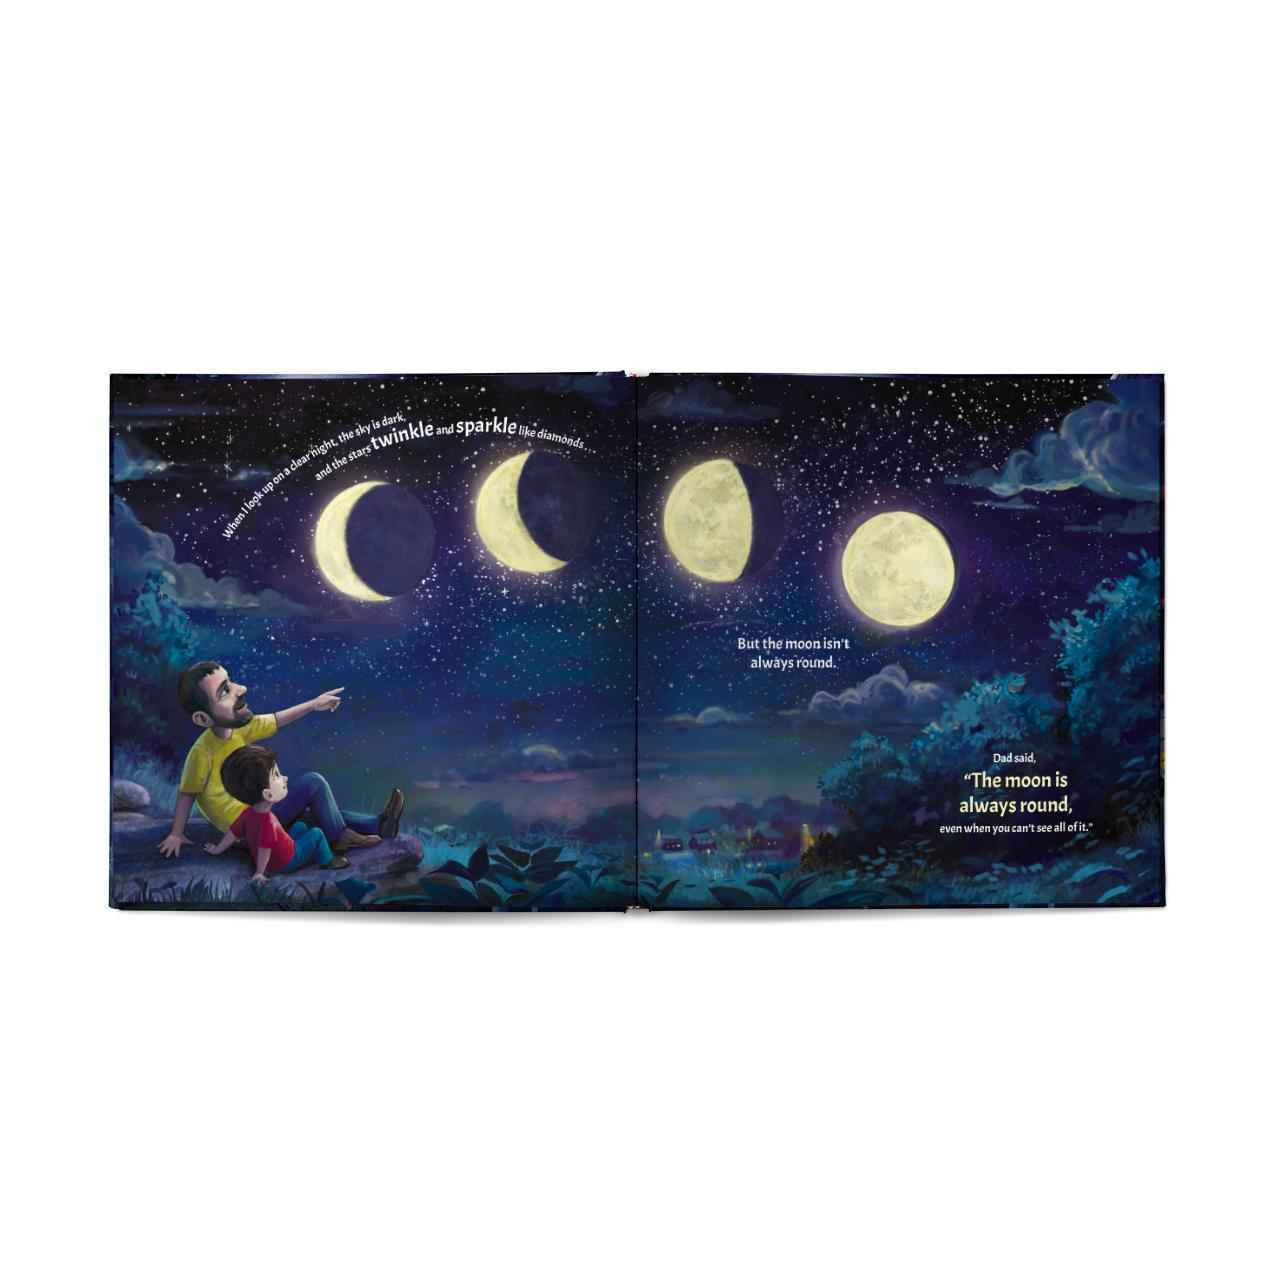 is　Buy　The　Picture　Moon　Always　New　Round　Press　Children　Book　9781645070276　Growth